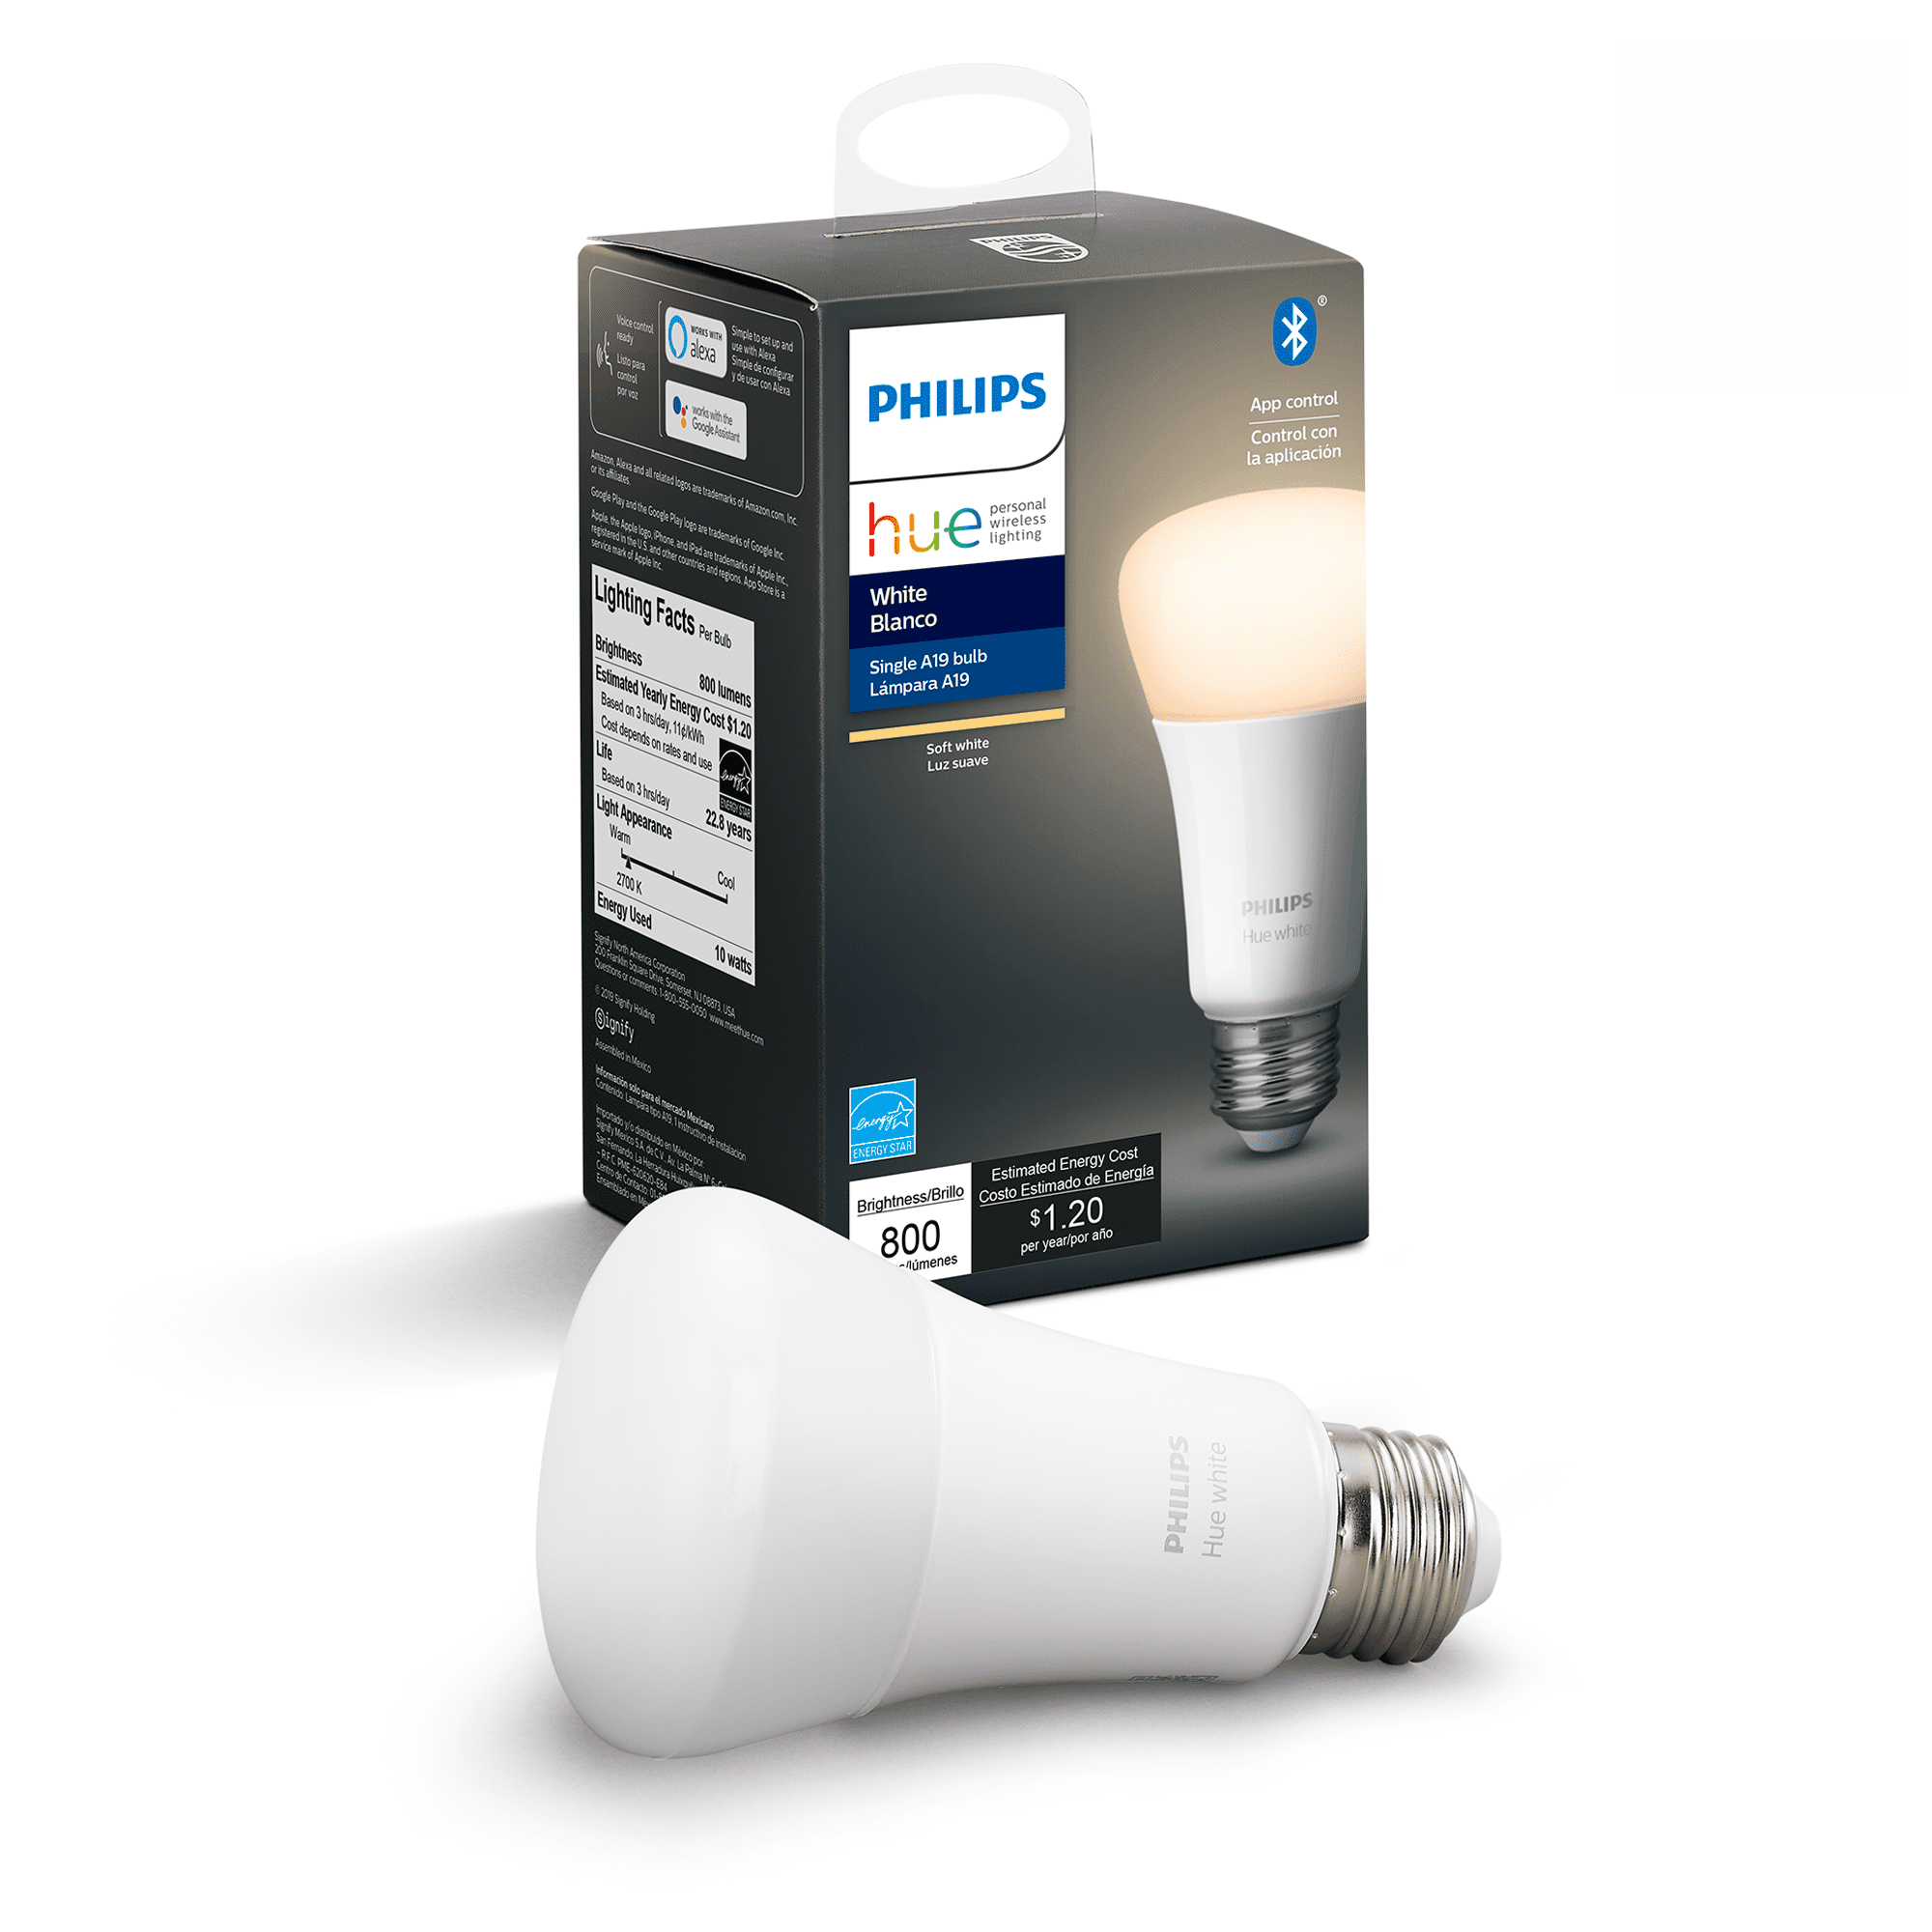 1 Philips Hue White A19 LED Smart Bulb Bluetooth & ZigBee Compatible 800 Lumens for sale online 